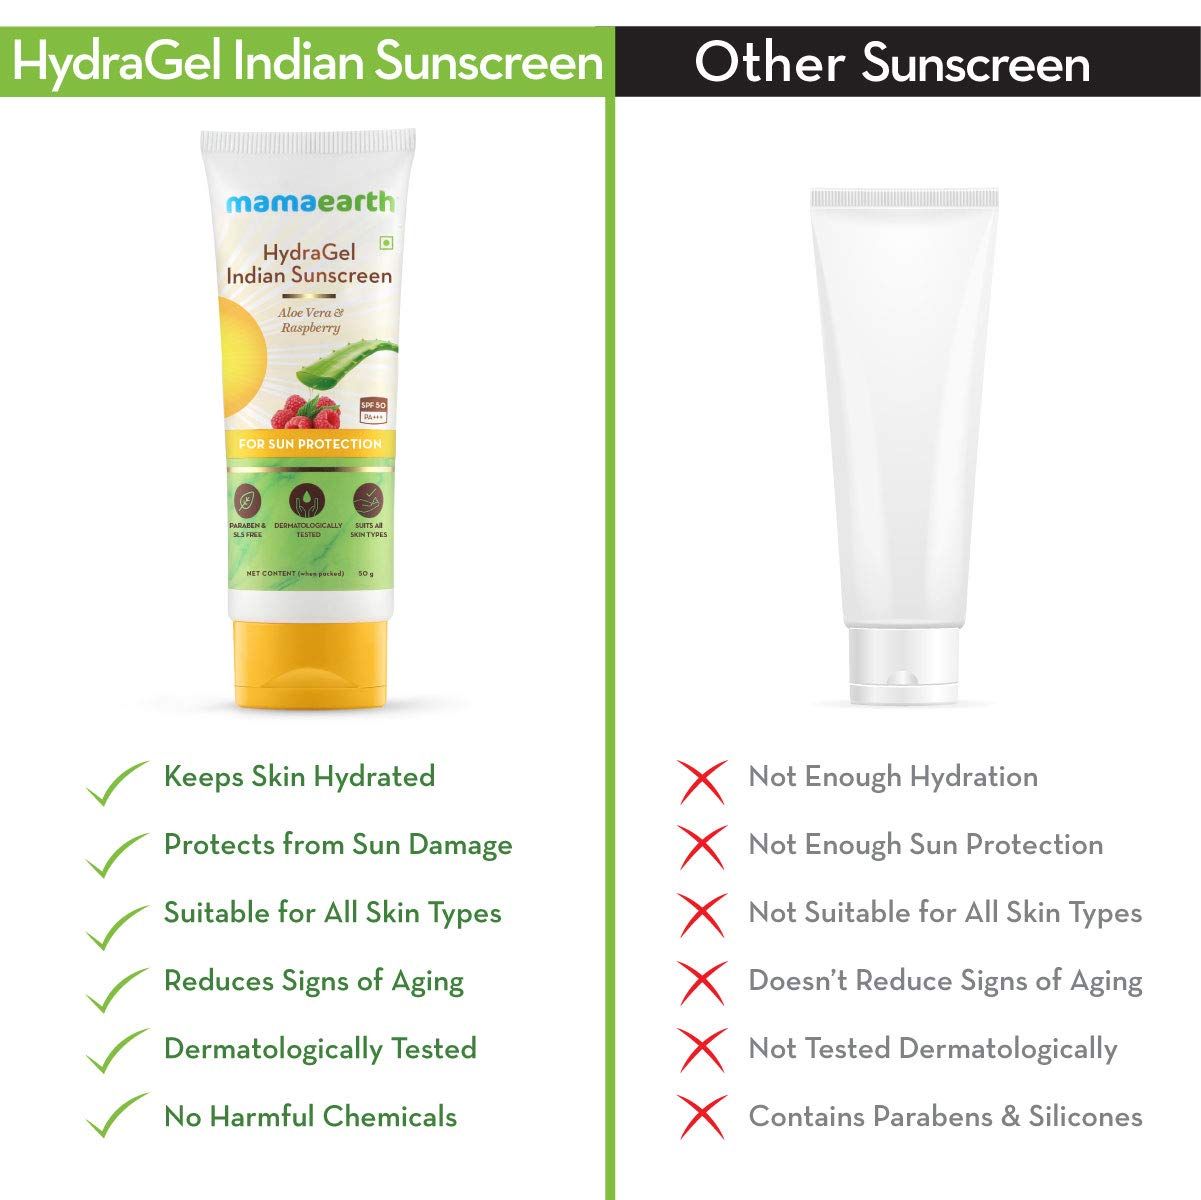 HydraGel Indian Sunscreen with Aloe Vera and Raspberry for Sun Protection - 50 g